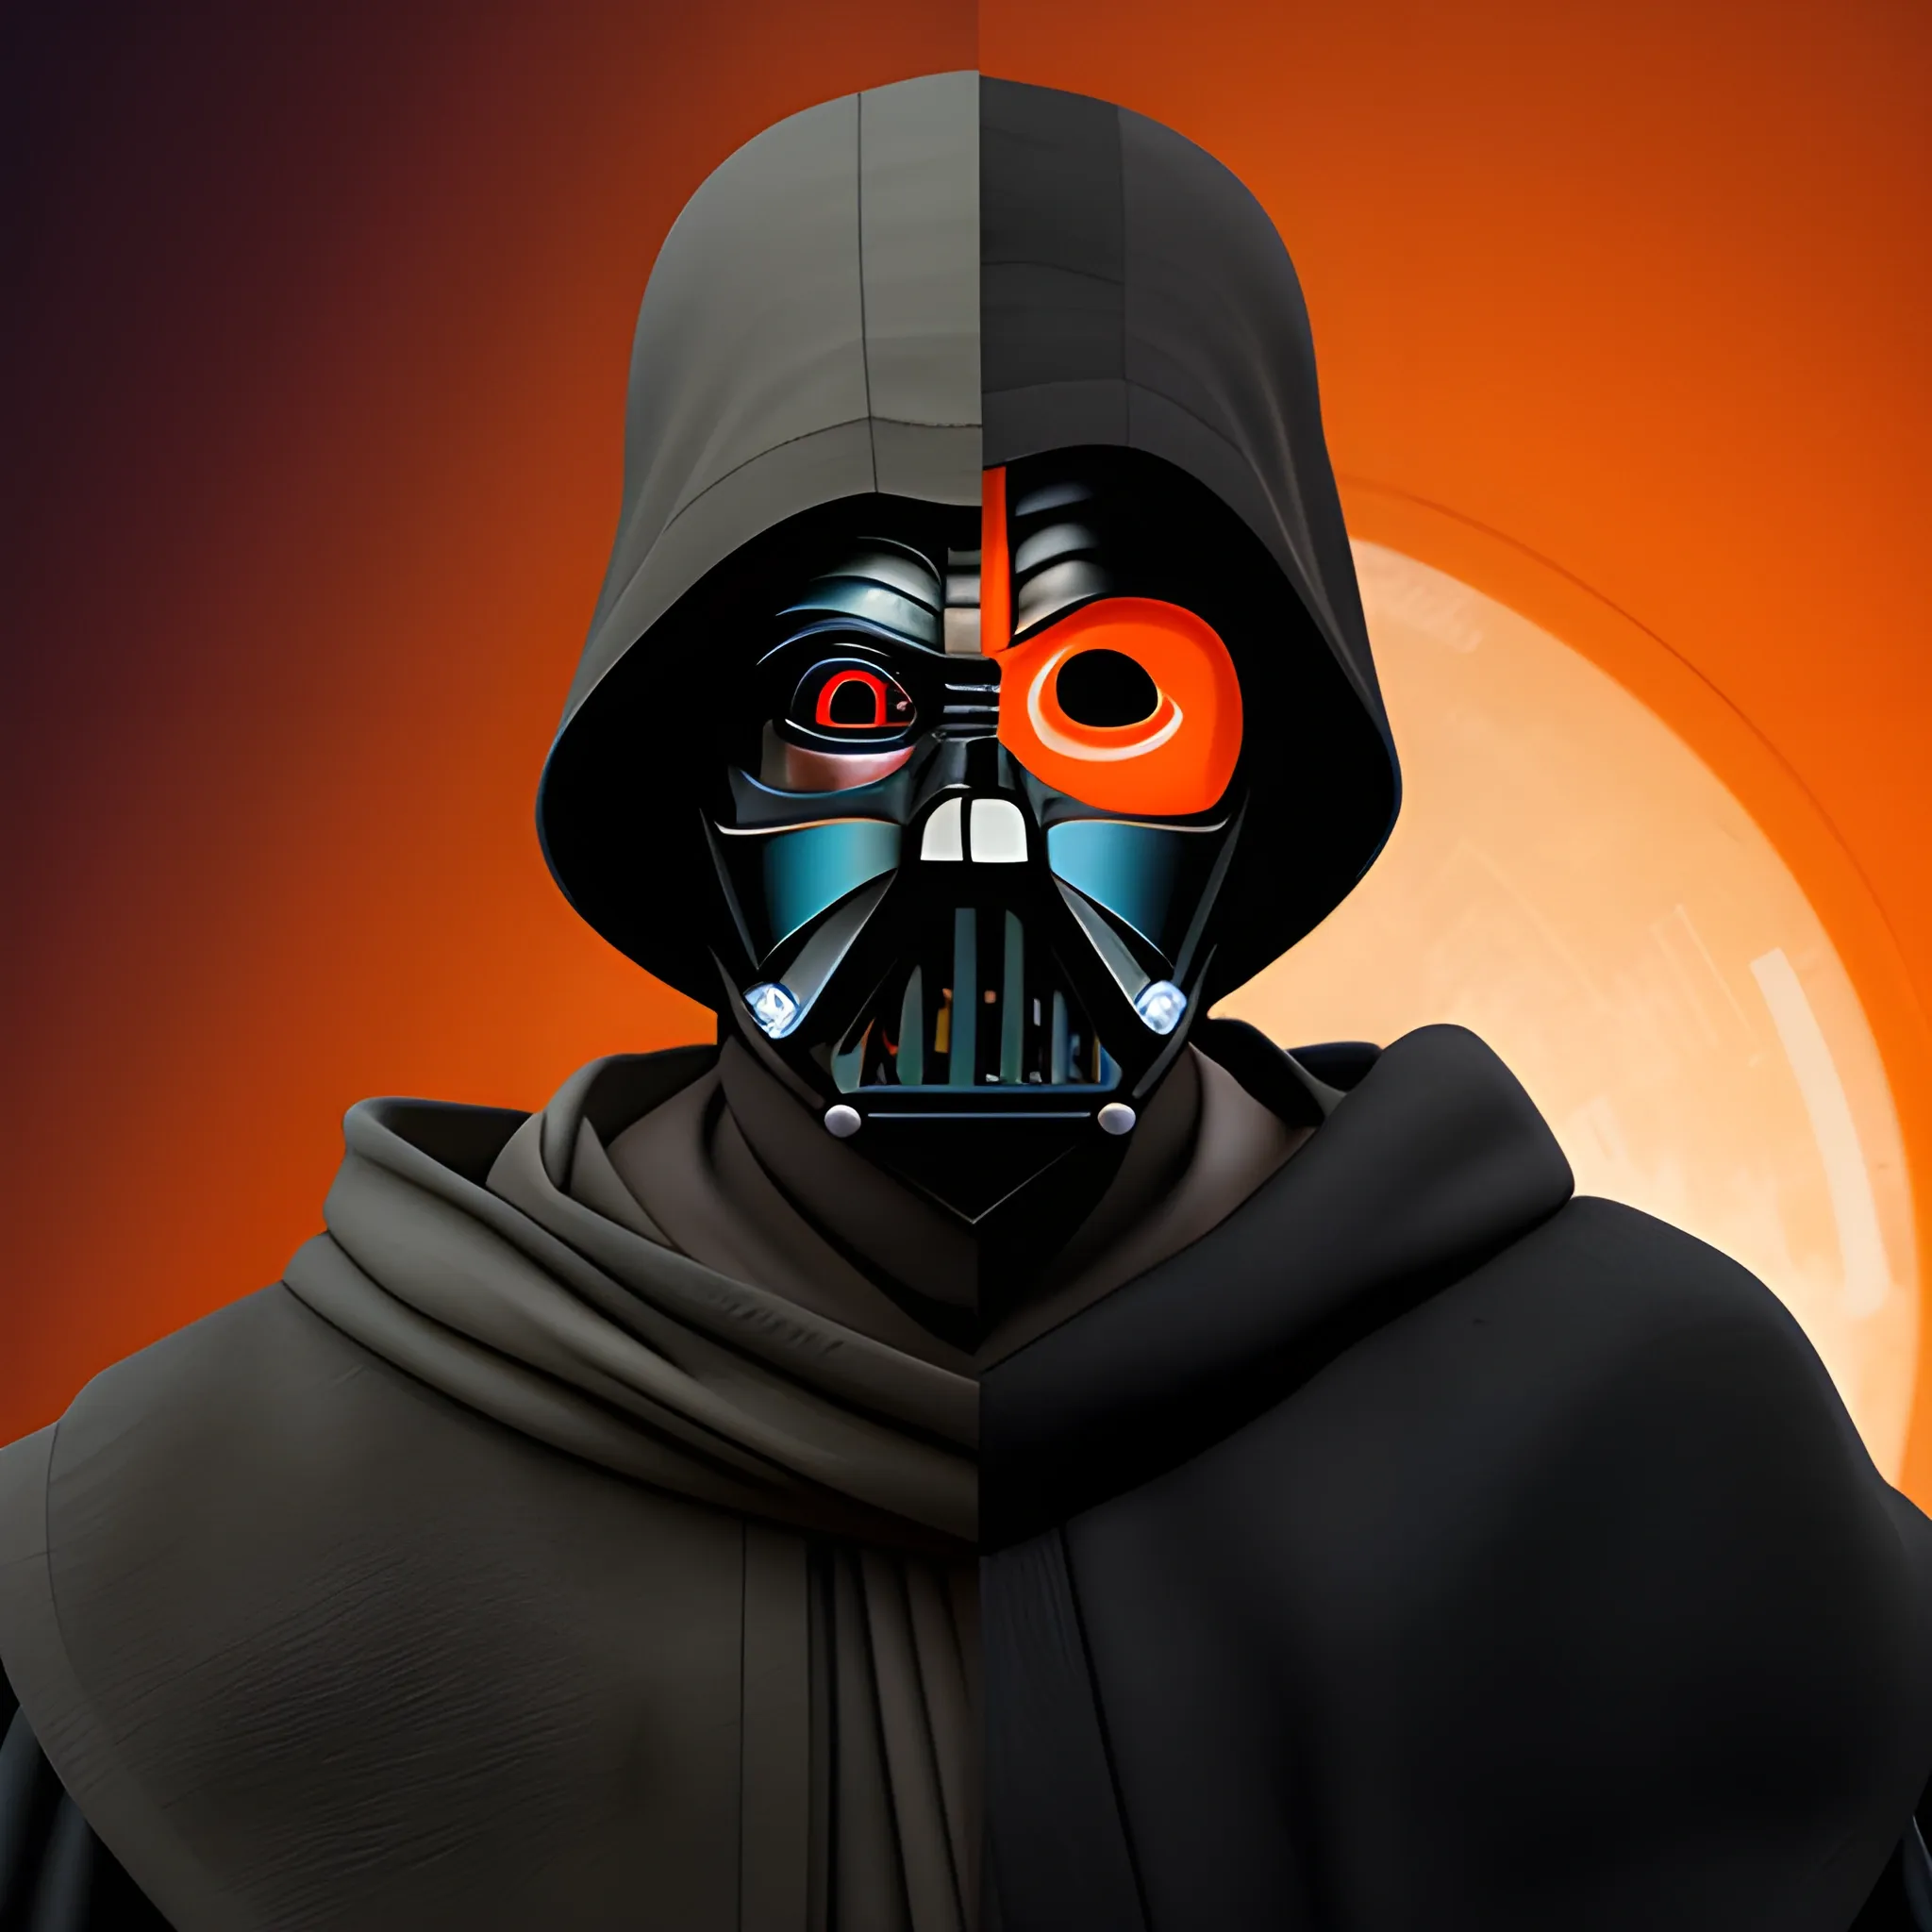 a three-quarter view of a character from star wars who is a grey-jedi with very tired orange eyes, wearing a tattered black hood with a star wars style face mask that shows their eyes and black hair